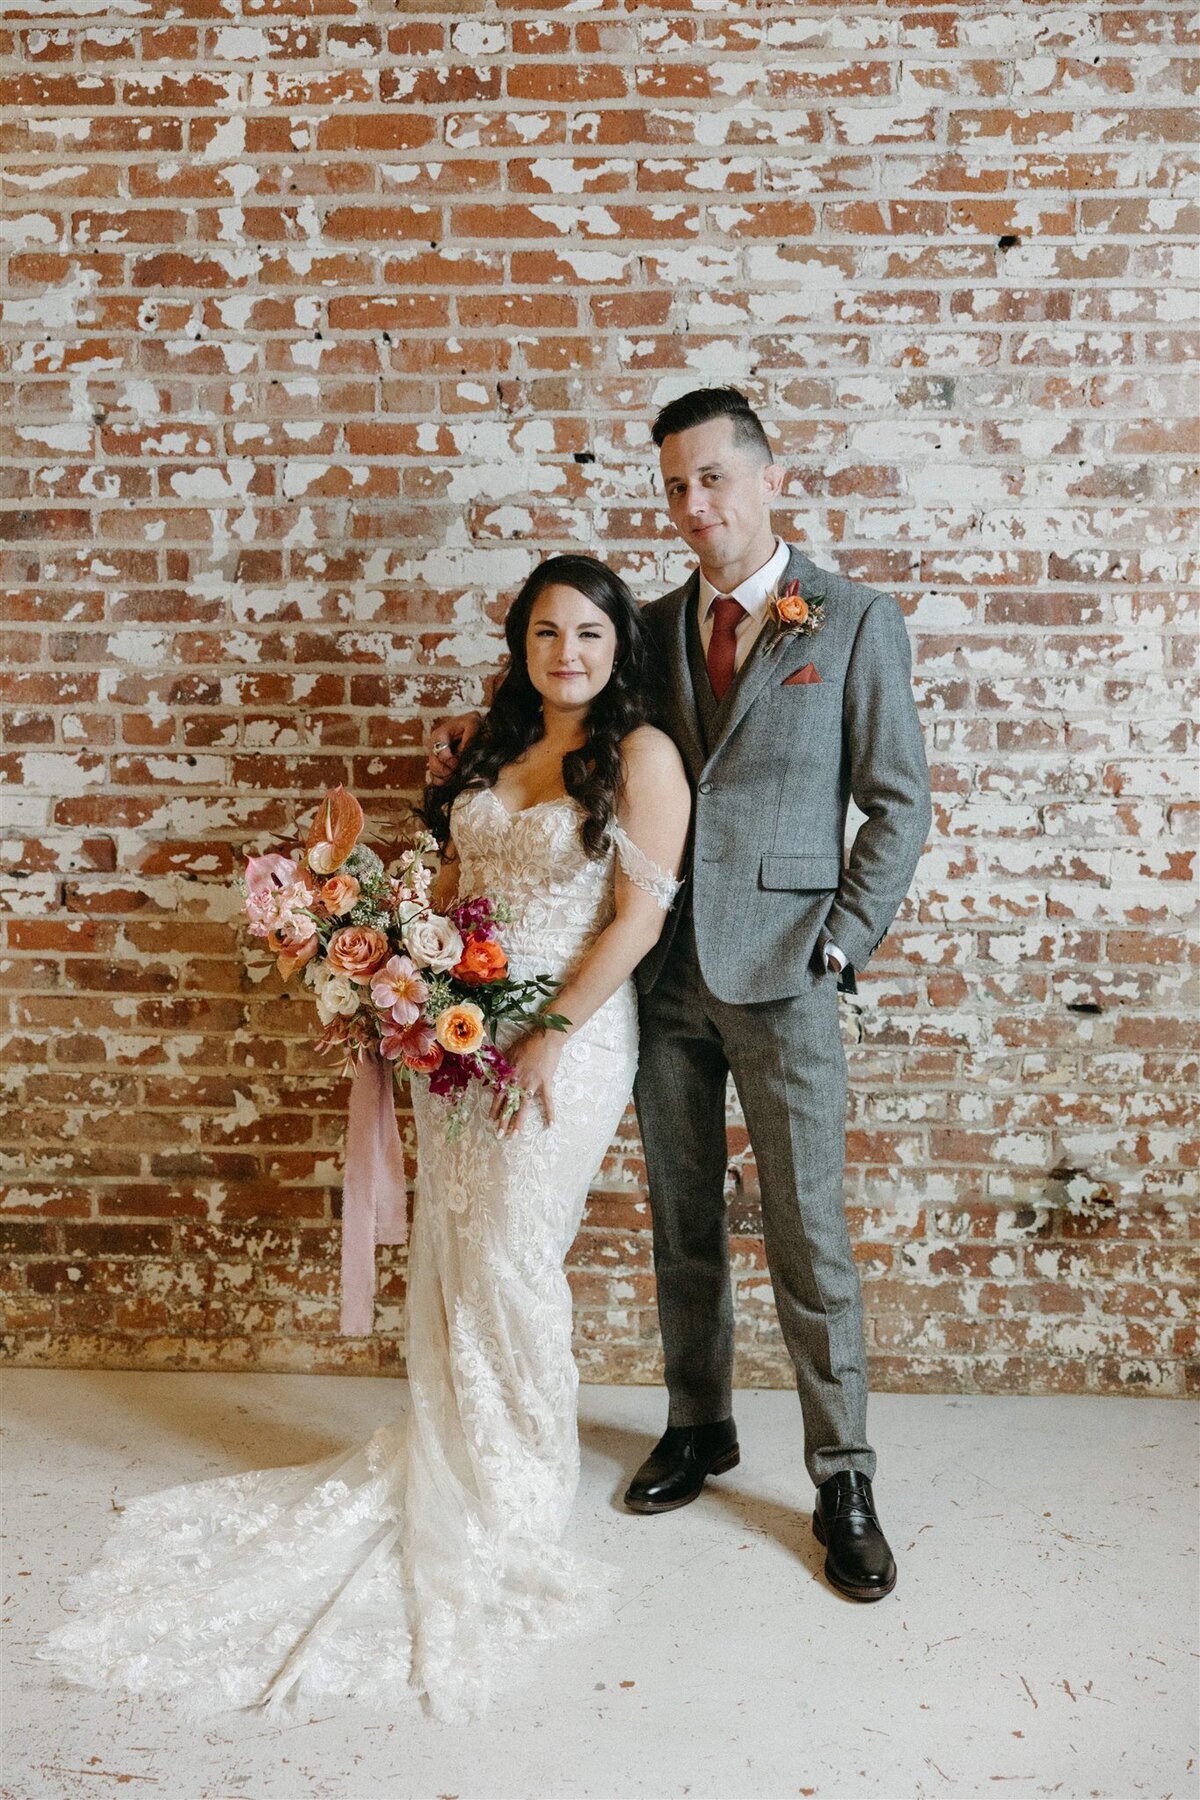 Bride wearing lace dress holding colorful bouquet and groom  wearing grey suit standing against brick wall  at the St Vrain, Longmont CO.